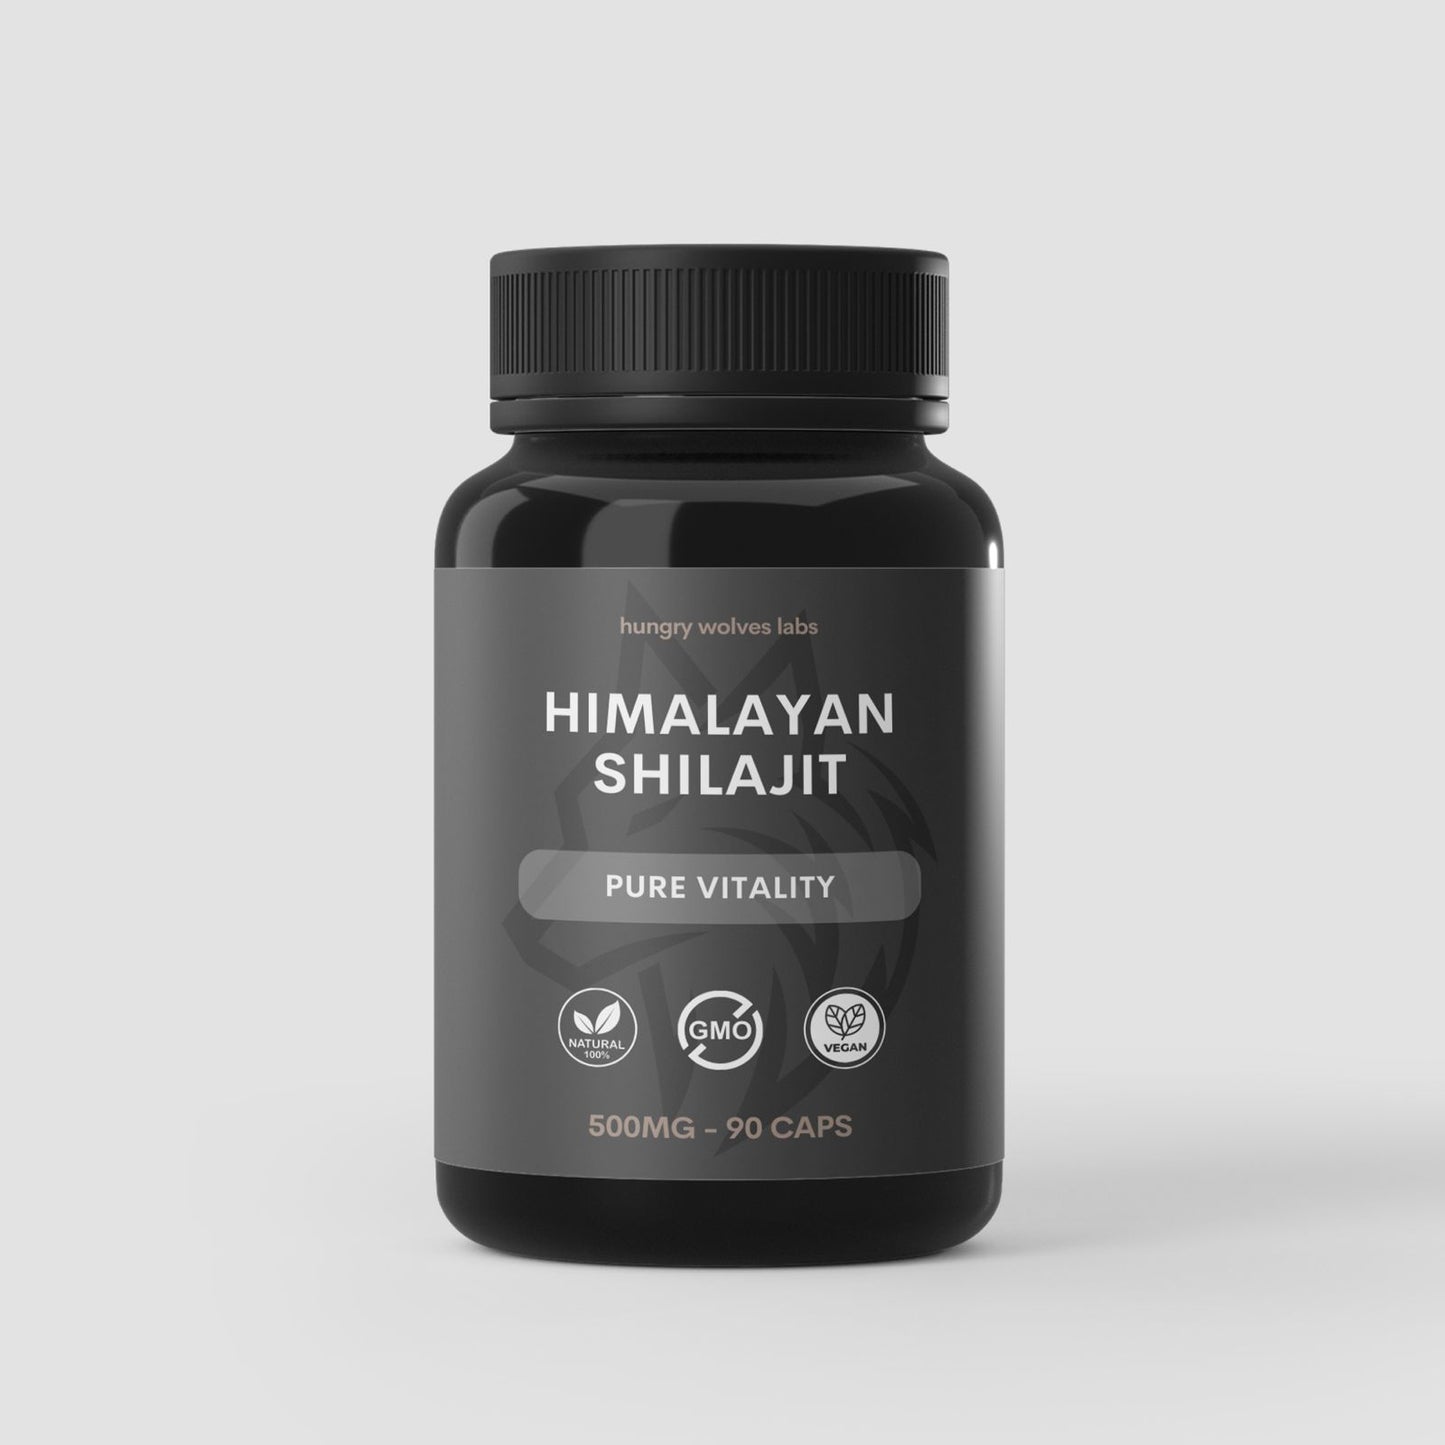 Himalayan Shilajit for Holistic Well-Being